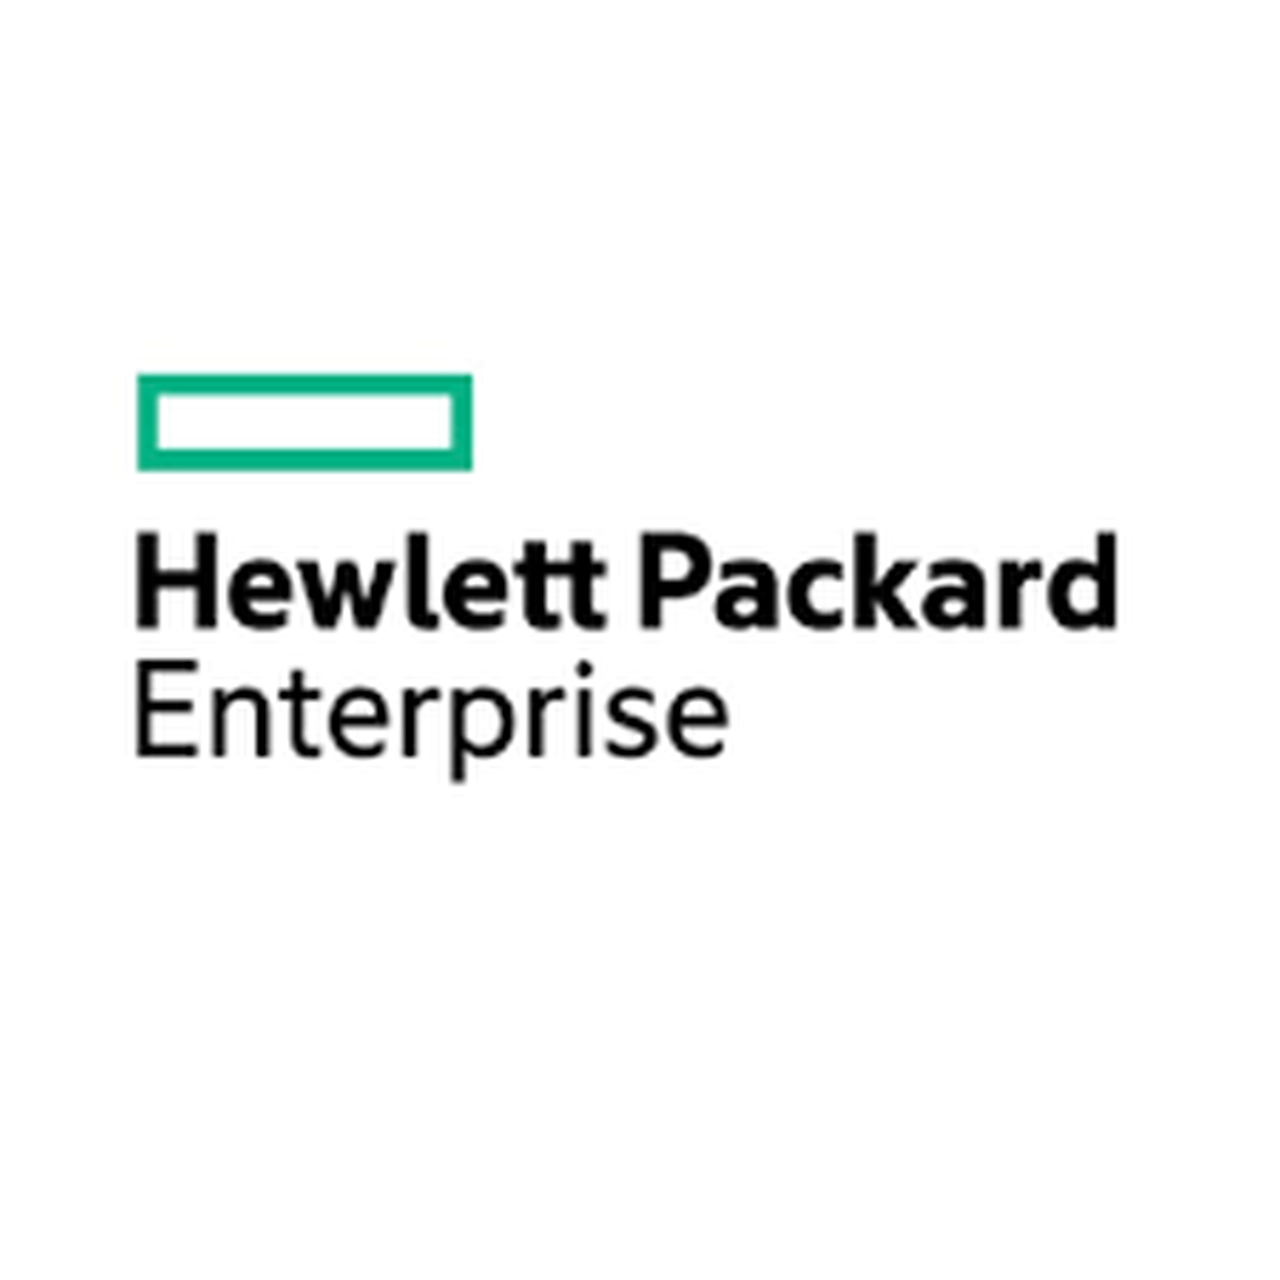 HPE SN6600B 32Gb 48/48 Fiber Channel Switch South Africa - English localization